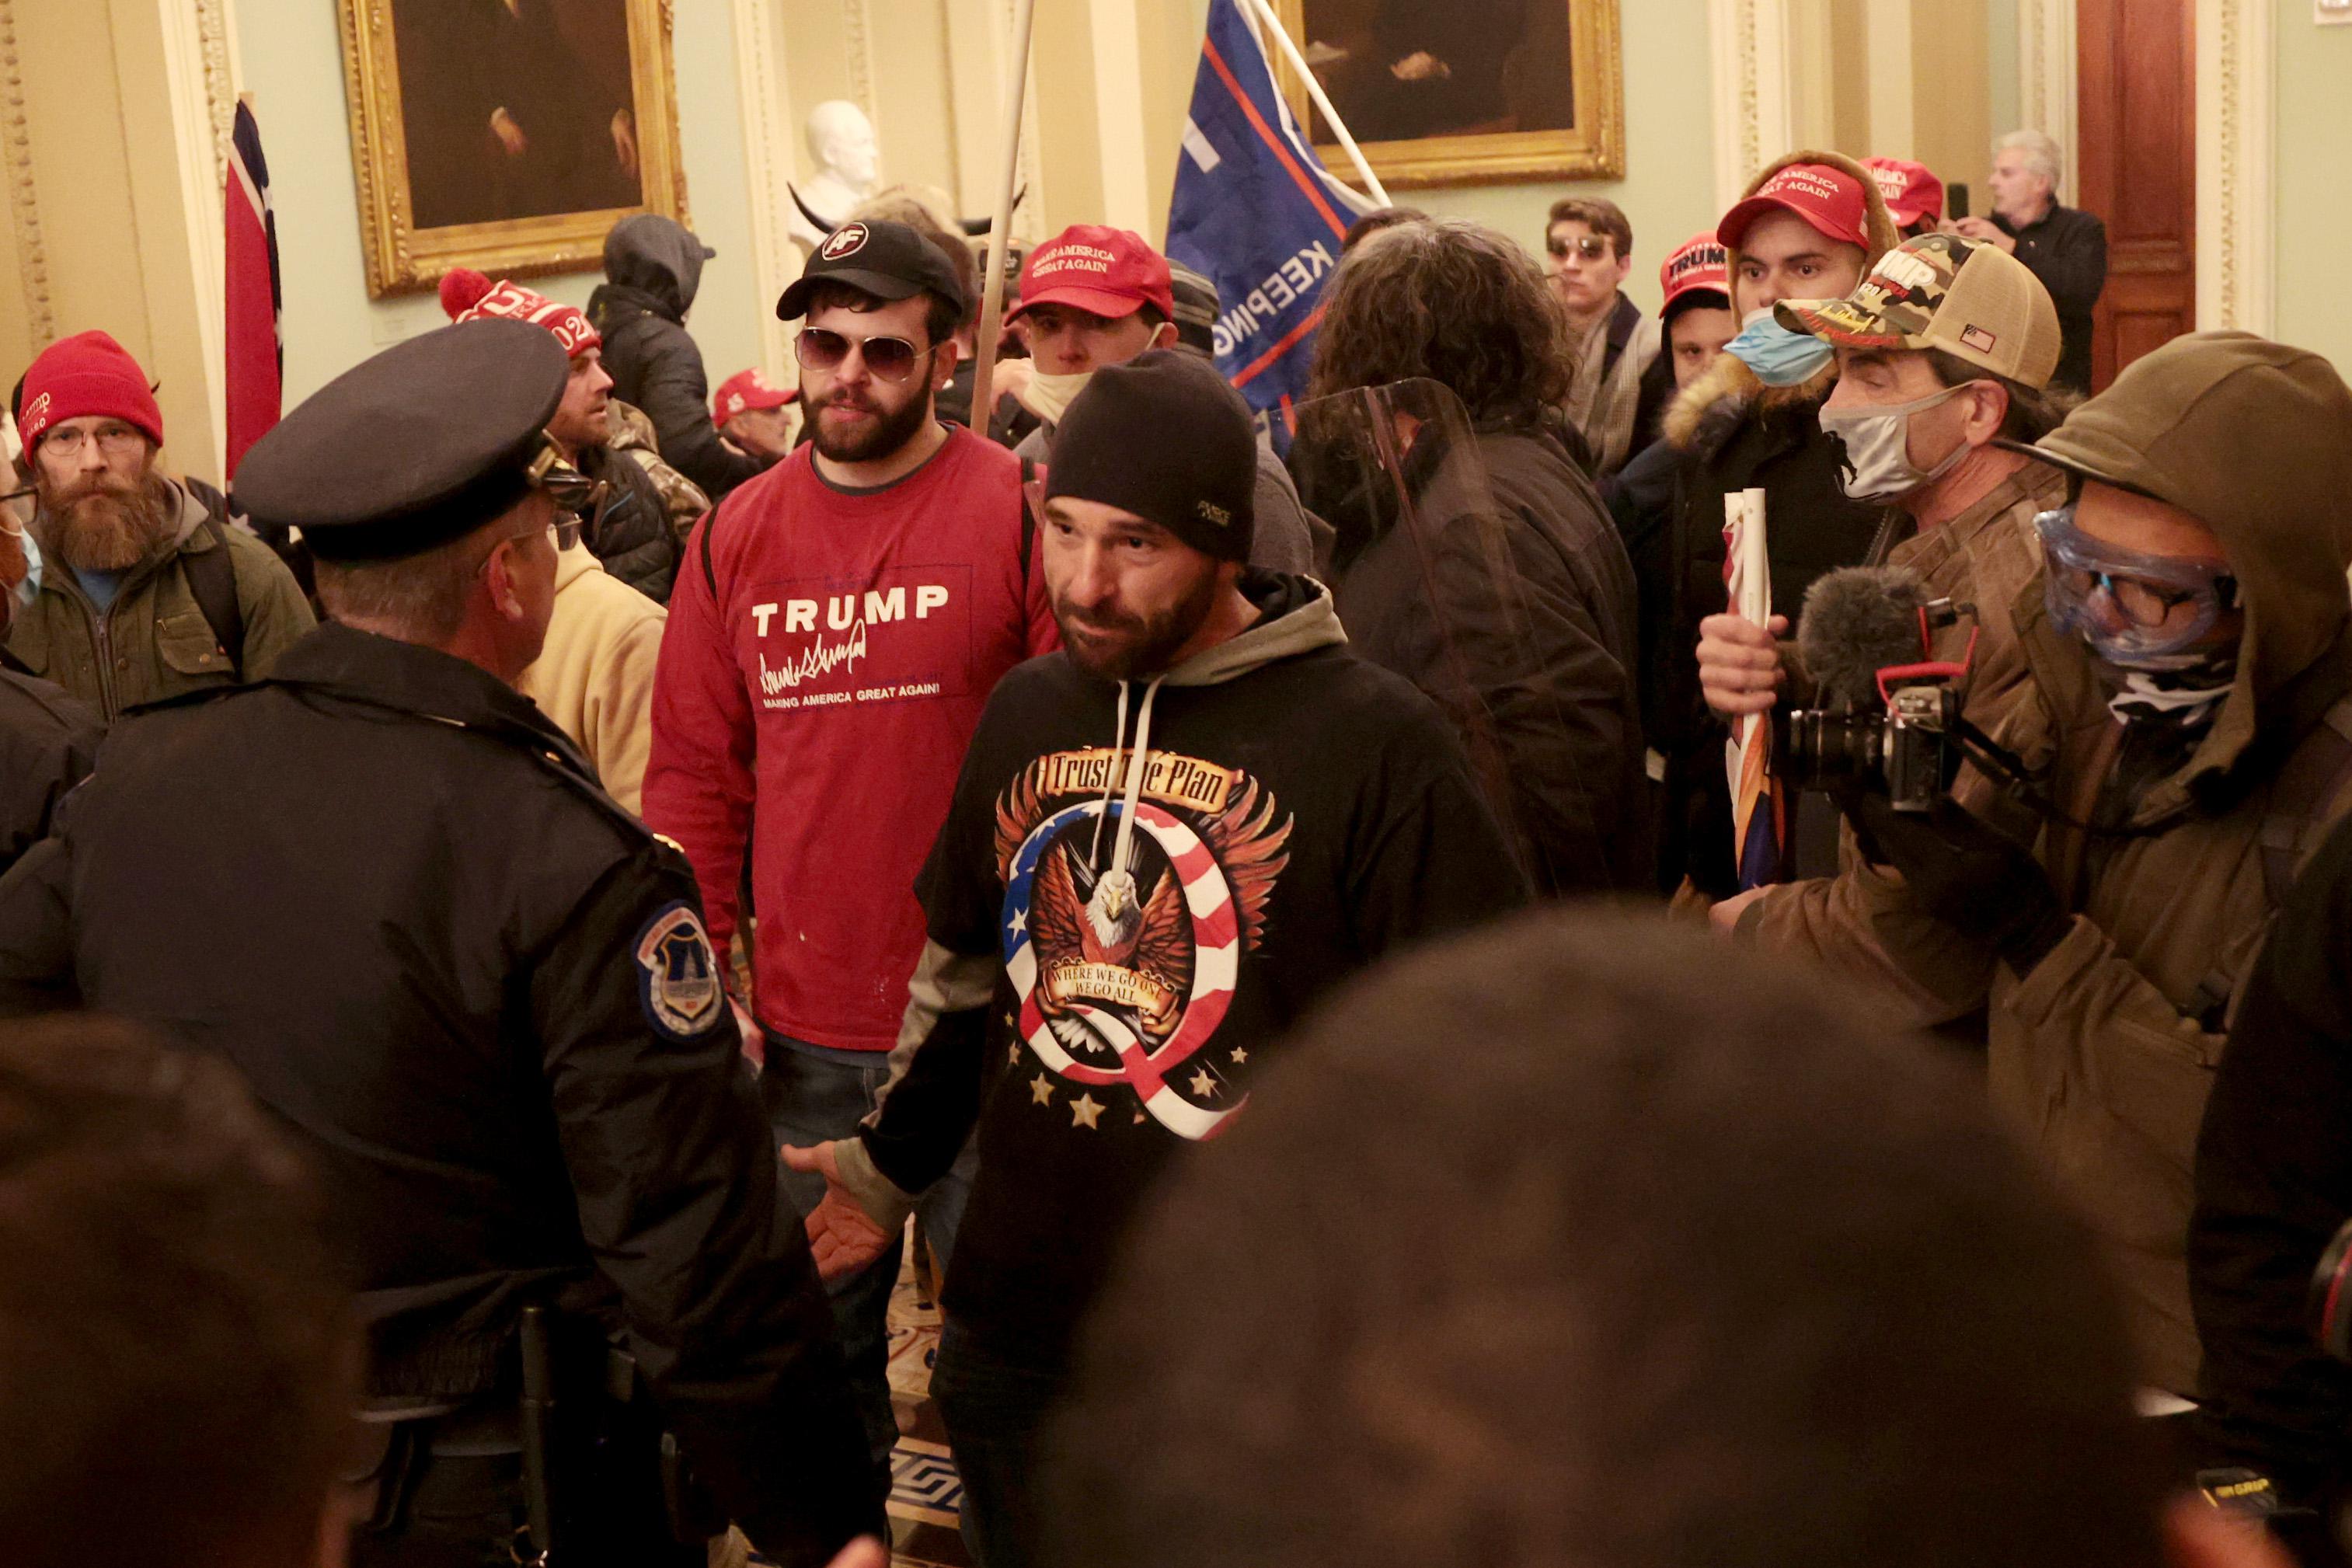 A hallway in the Capitol crowded with rioters wearing Trump insignia. One rioter wearing a black QAnon shirt stares down a police officer.